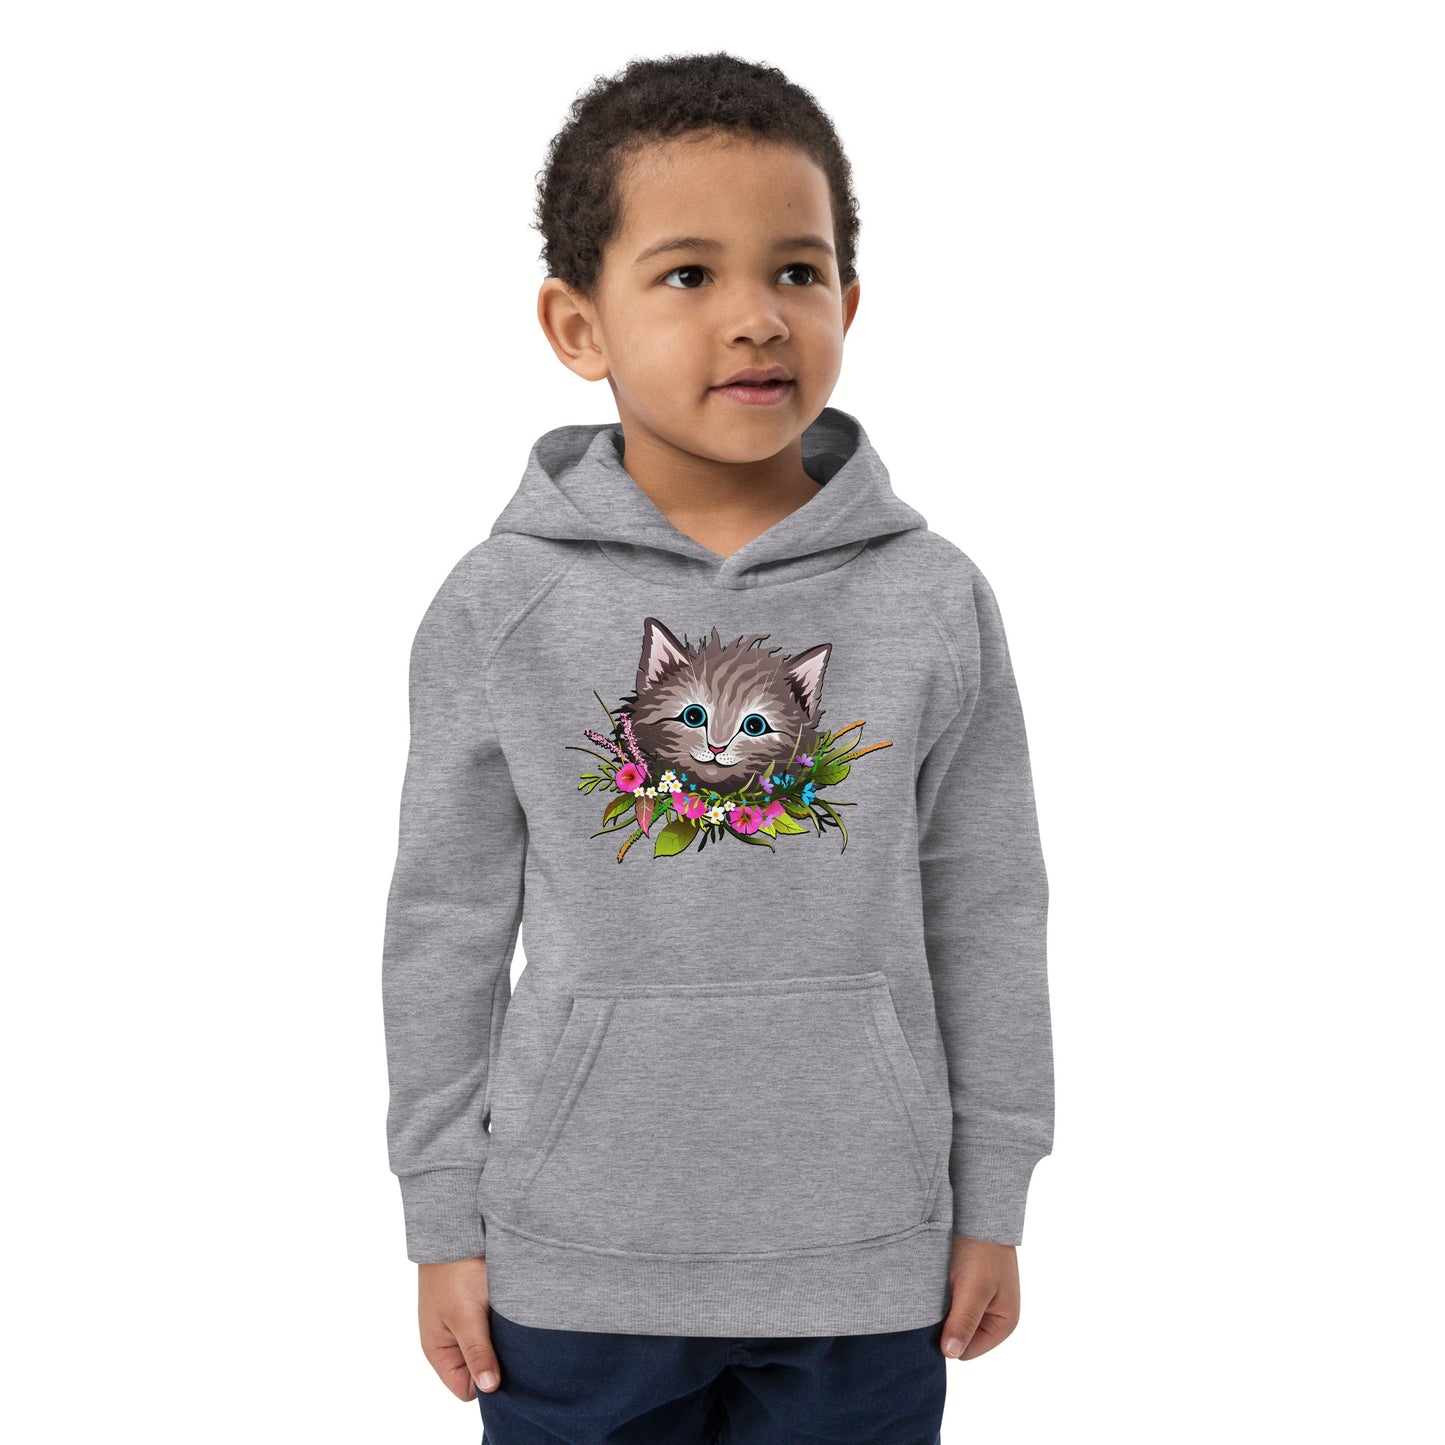 Cute Cat Face with Flowers Wreath Around the Neck Hoodie, No. 0155